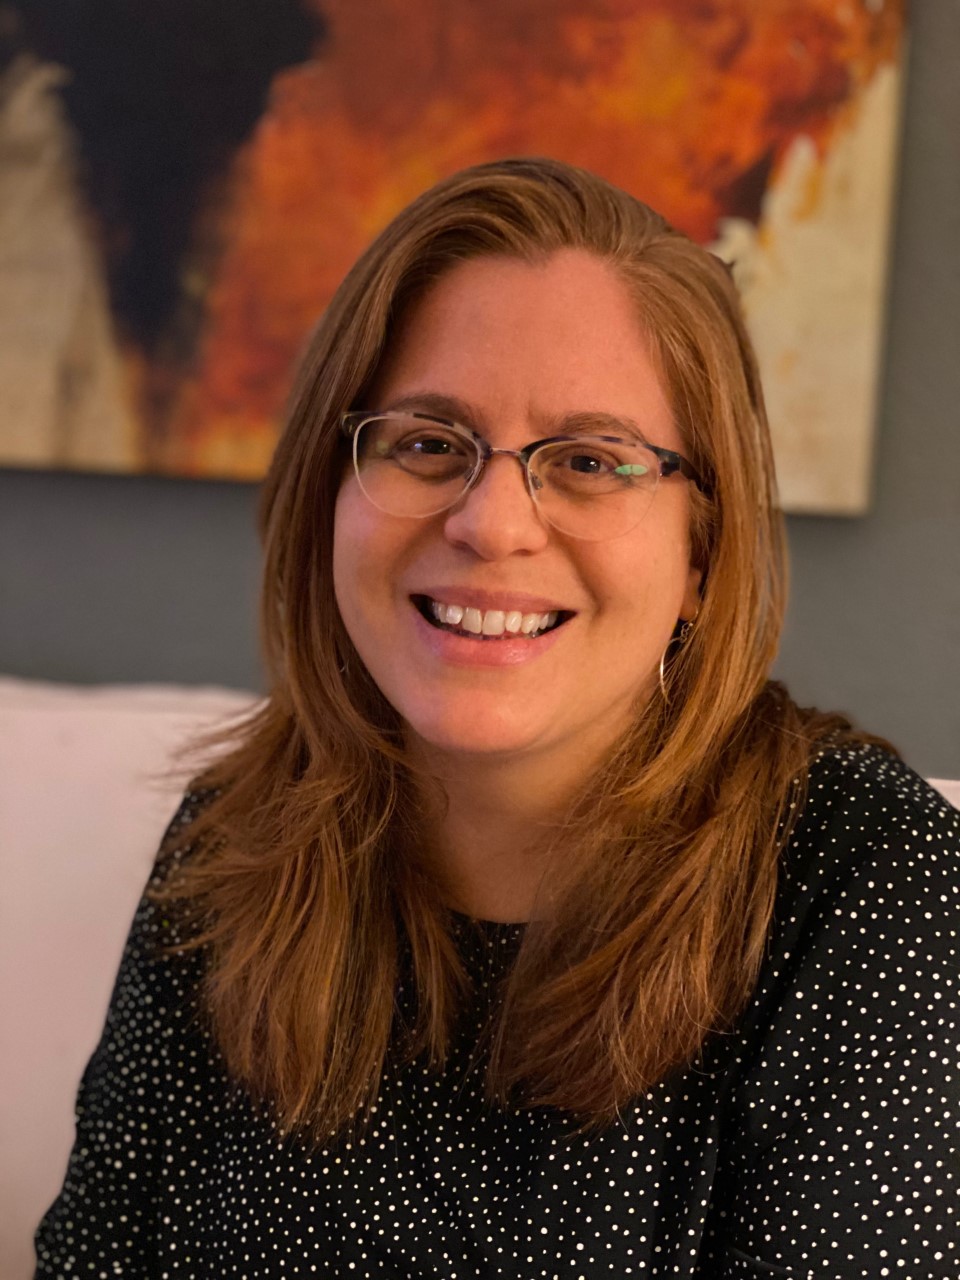 Photo of Sarah Dufek, a smiling white woman wearing glasses and a black and white polka dot shirt